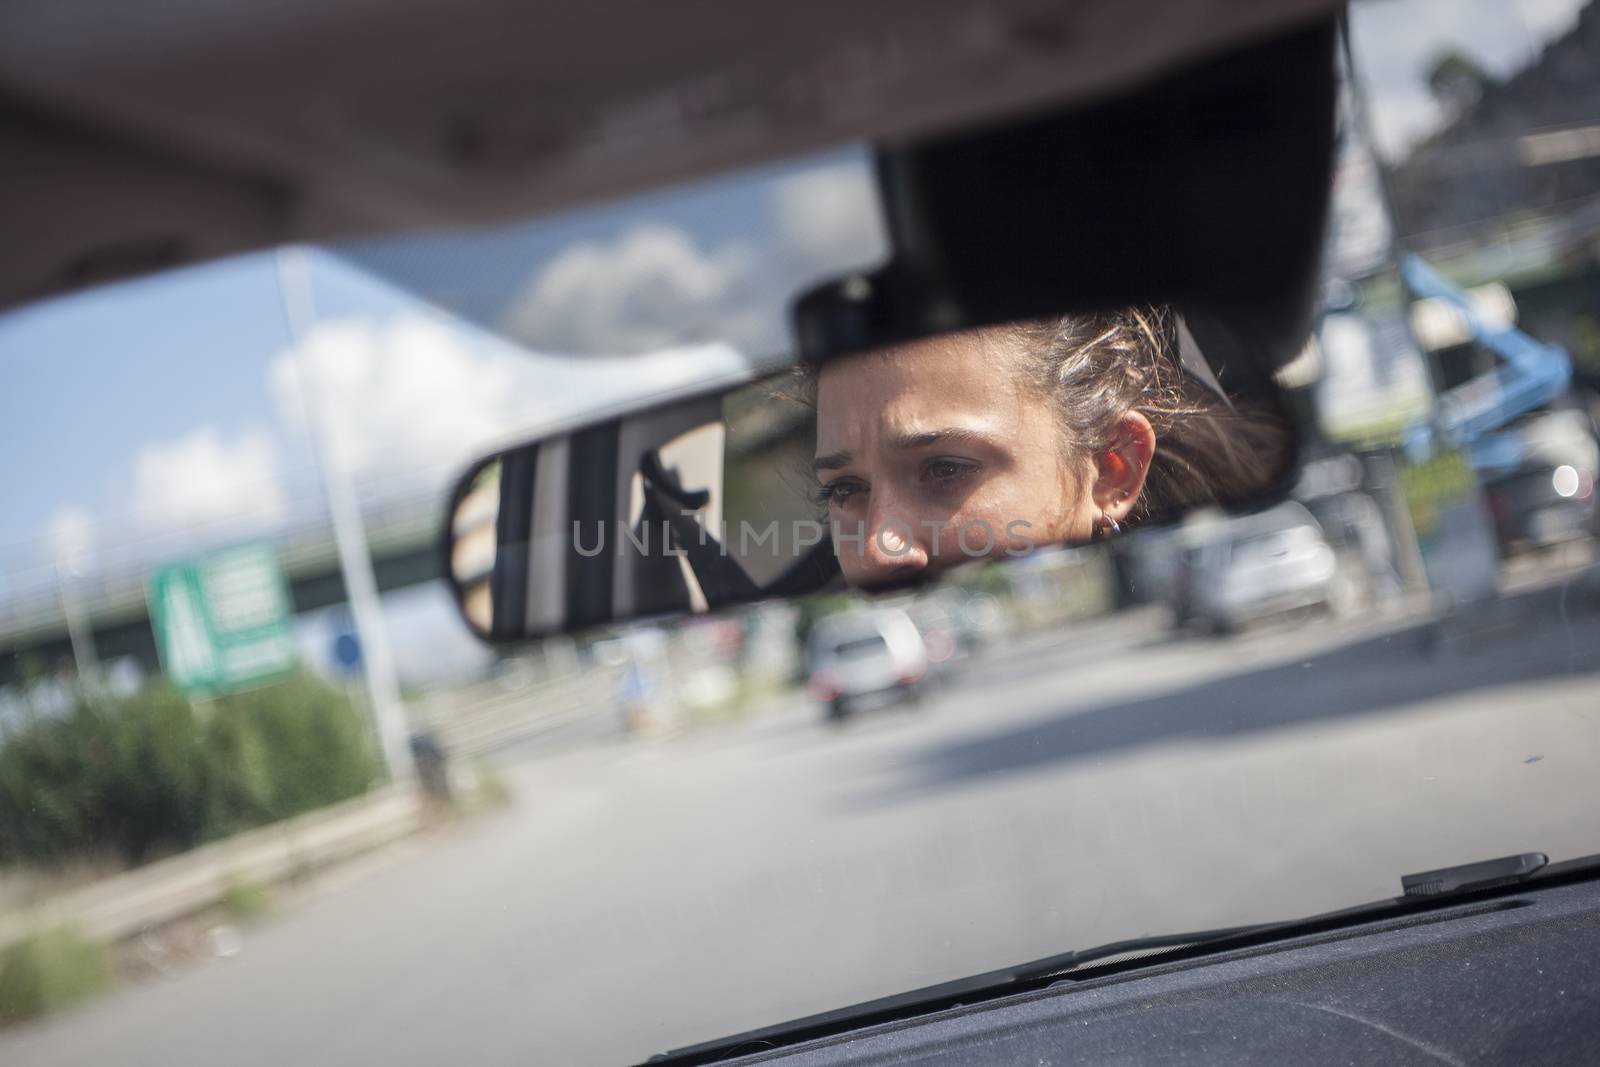 Car's rearview mirror #2 by pippocarlot